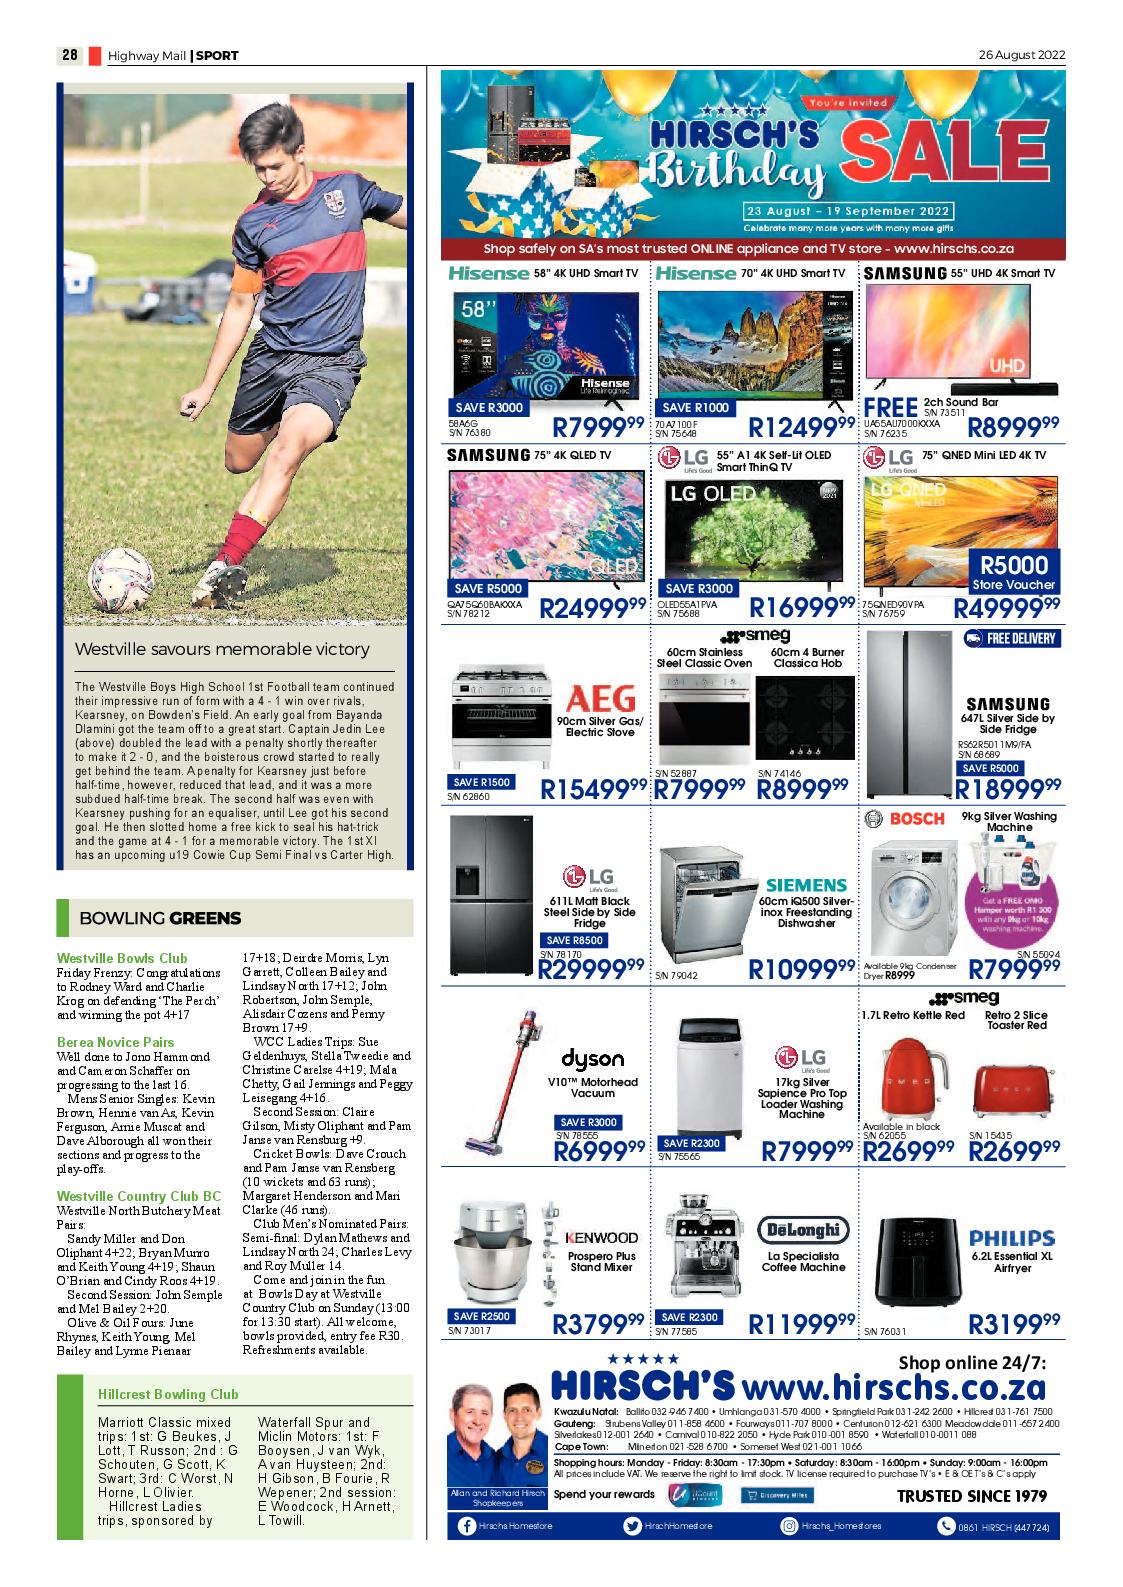 Highway Mail 26 August 2022 page 28